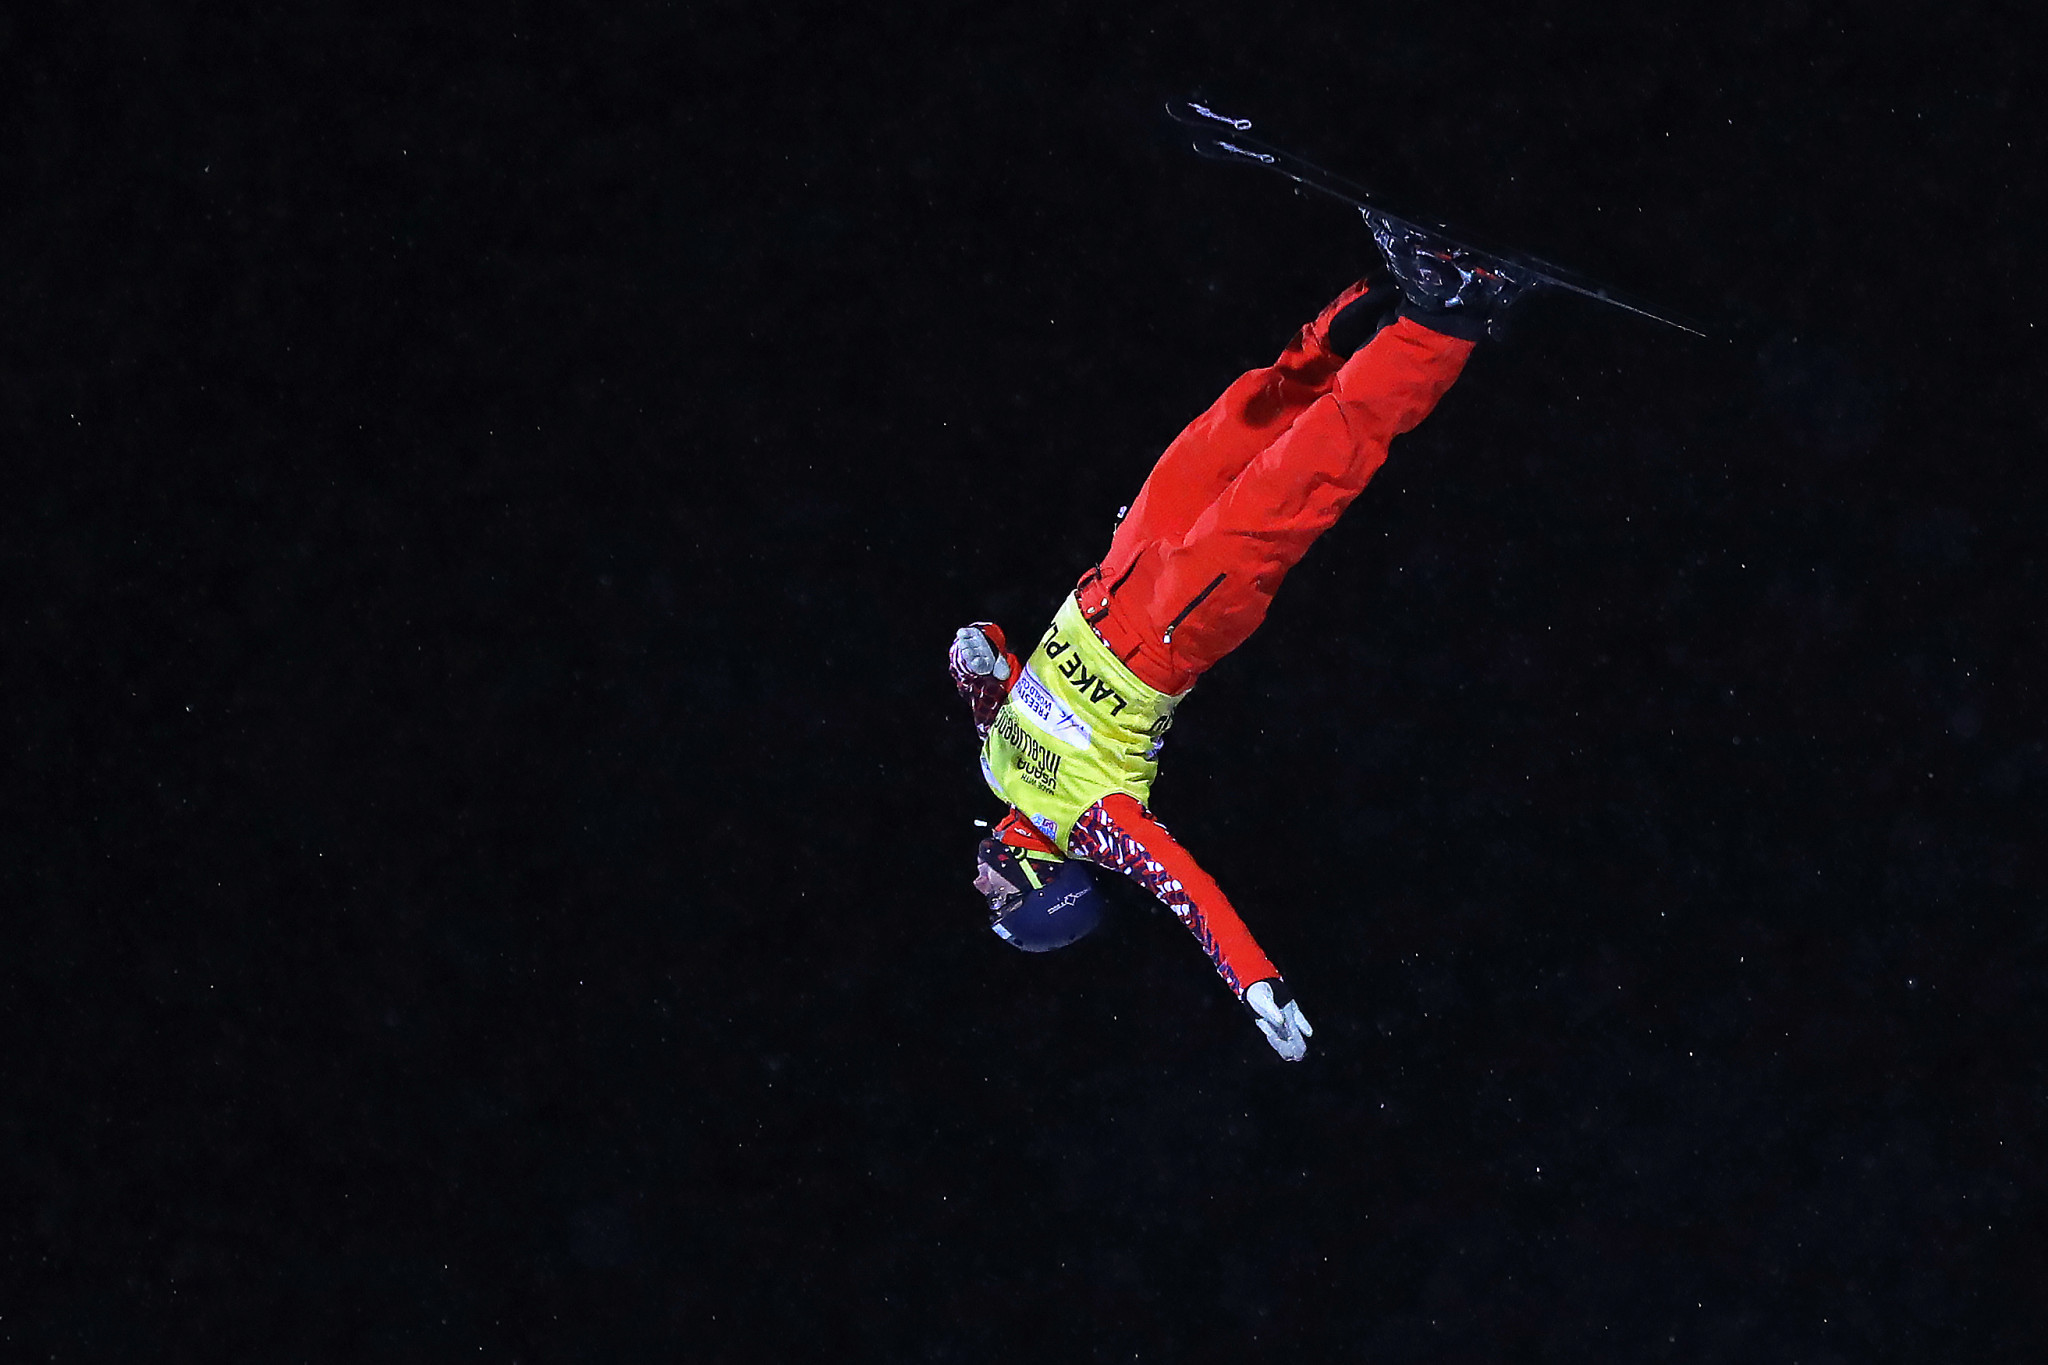 Maxim Burov secured the gold medal for the RSF on the final FIS Freestyle Ski World Championships in Almaty ©Getty Images